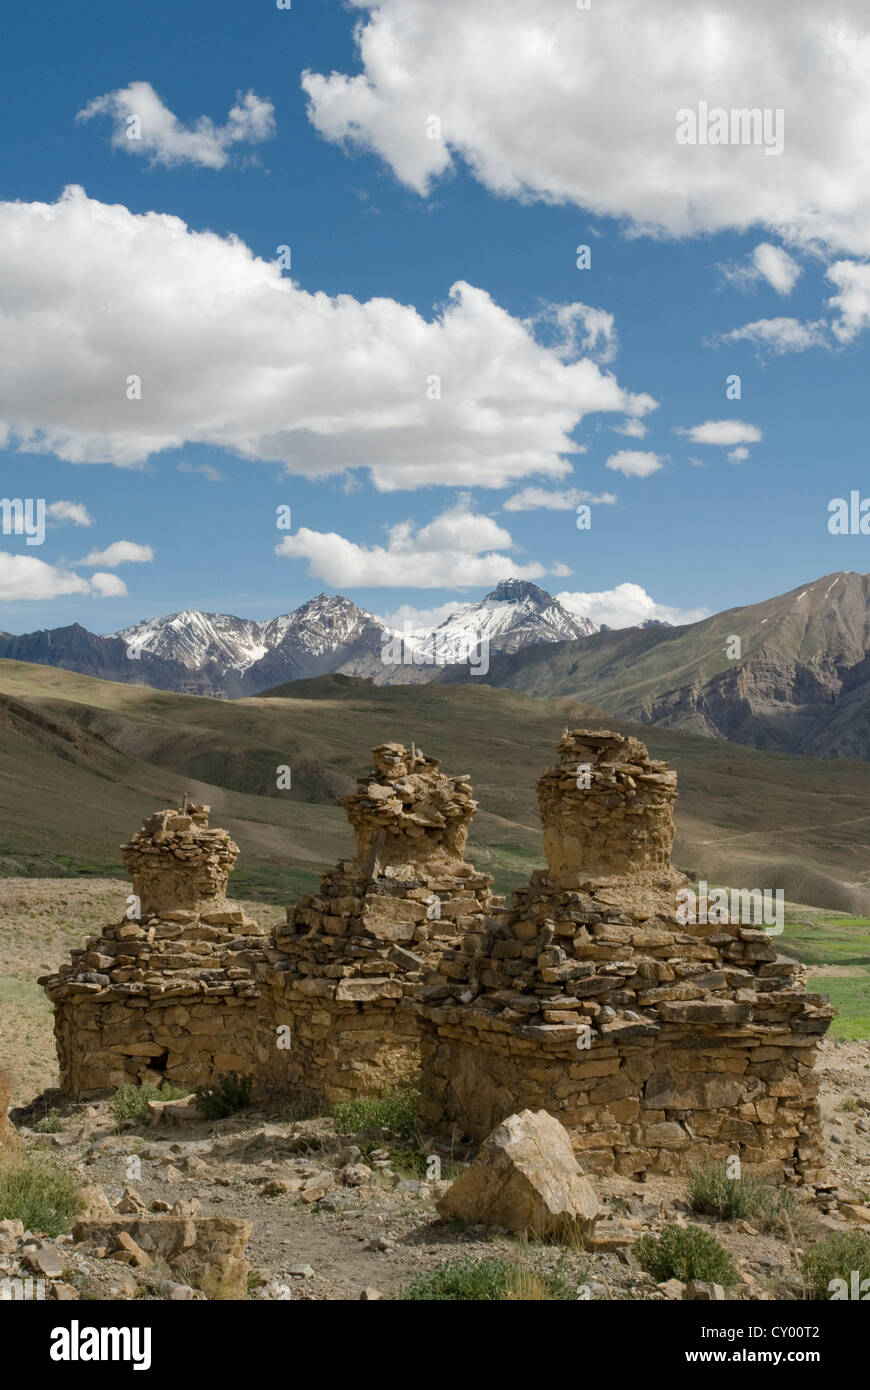 At an altitude of 14,200ft (4,300m), ancient chortens line a trail above Kibber village, Spiti, in Northern India Stock Photo